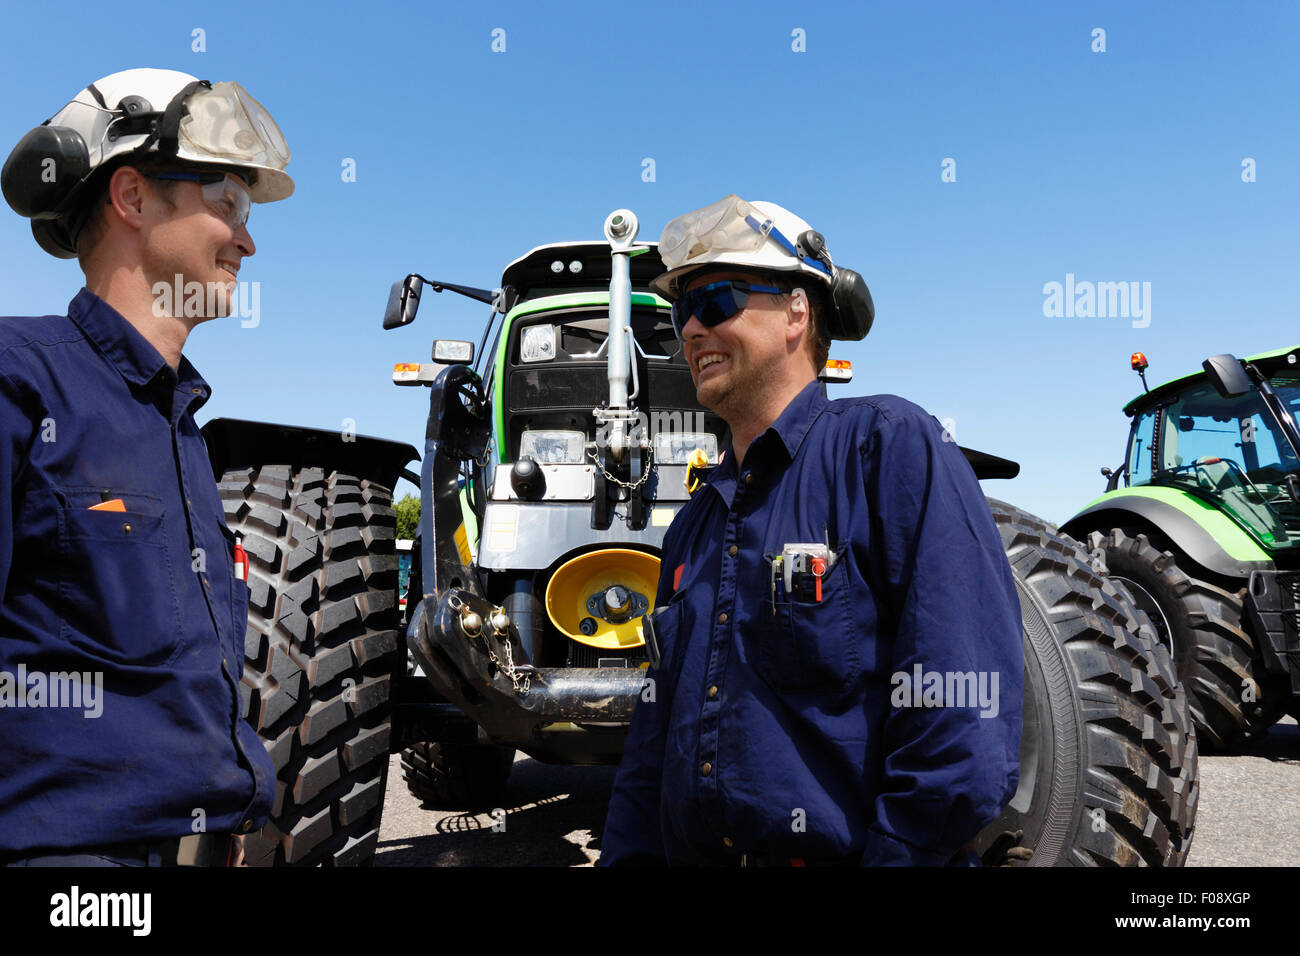 two mechanics with giant farming tractors Stock Photo